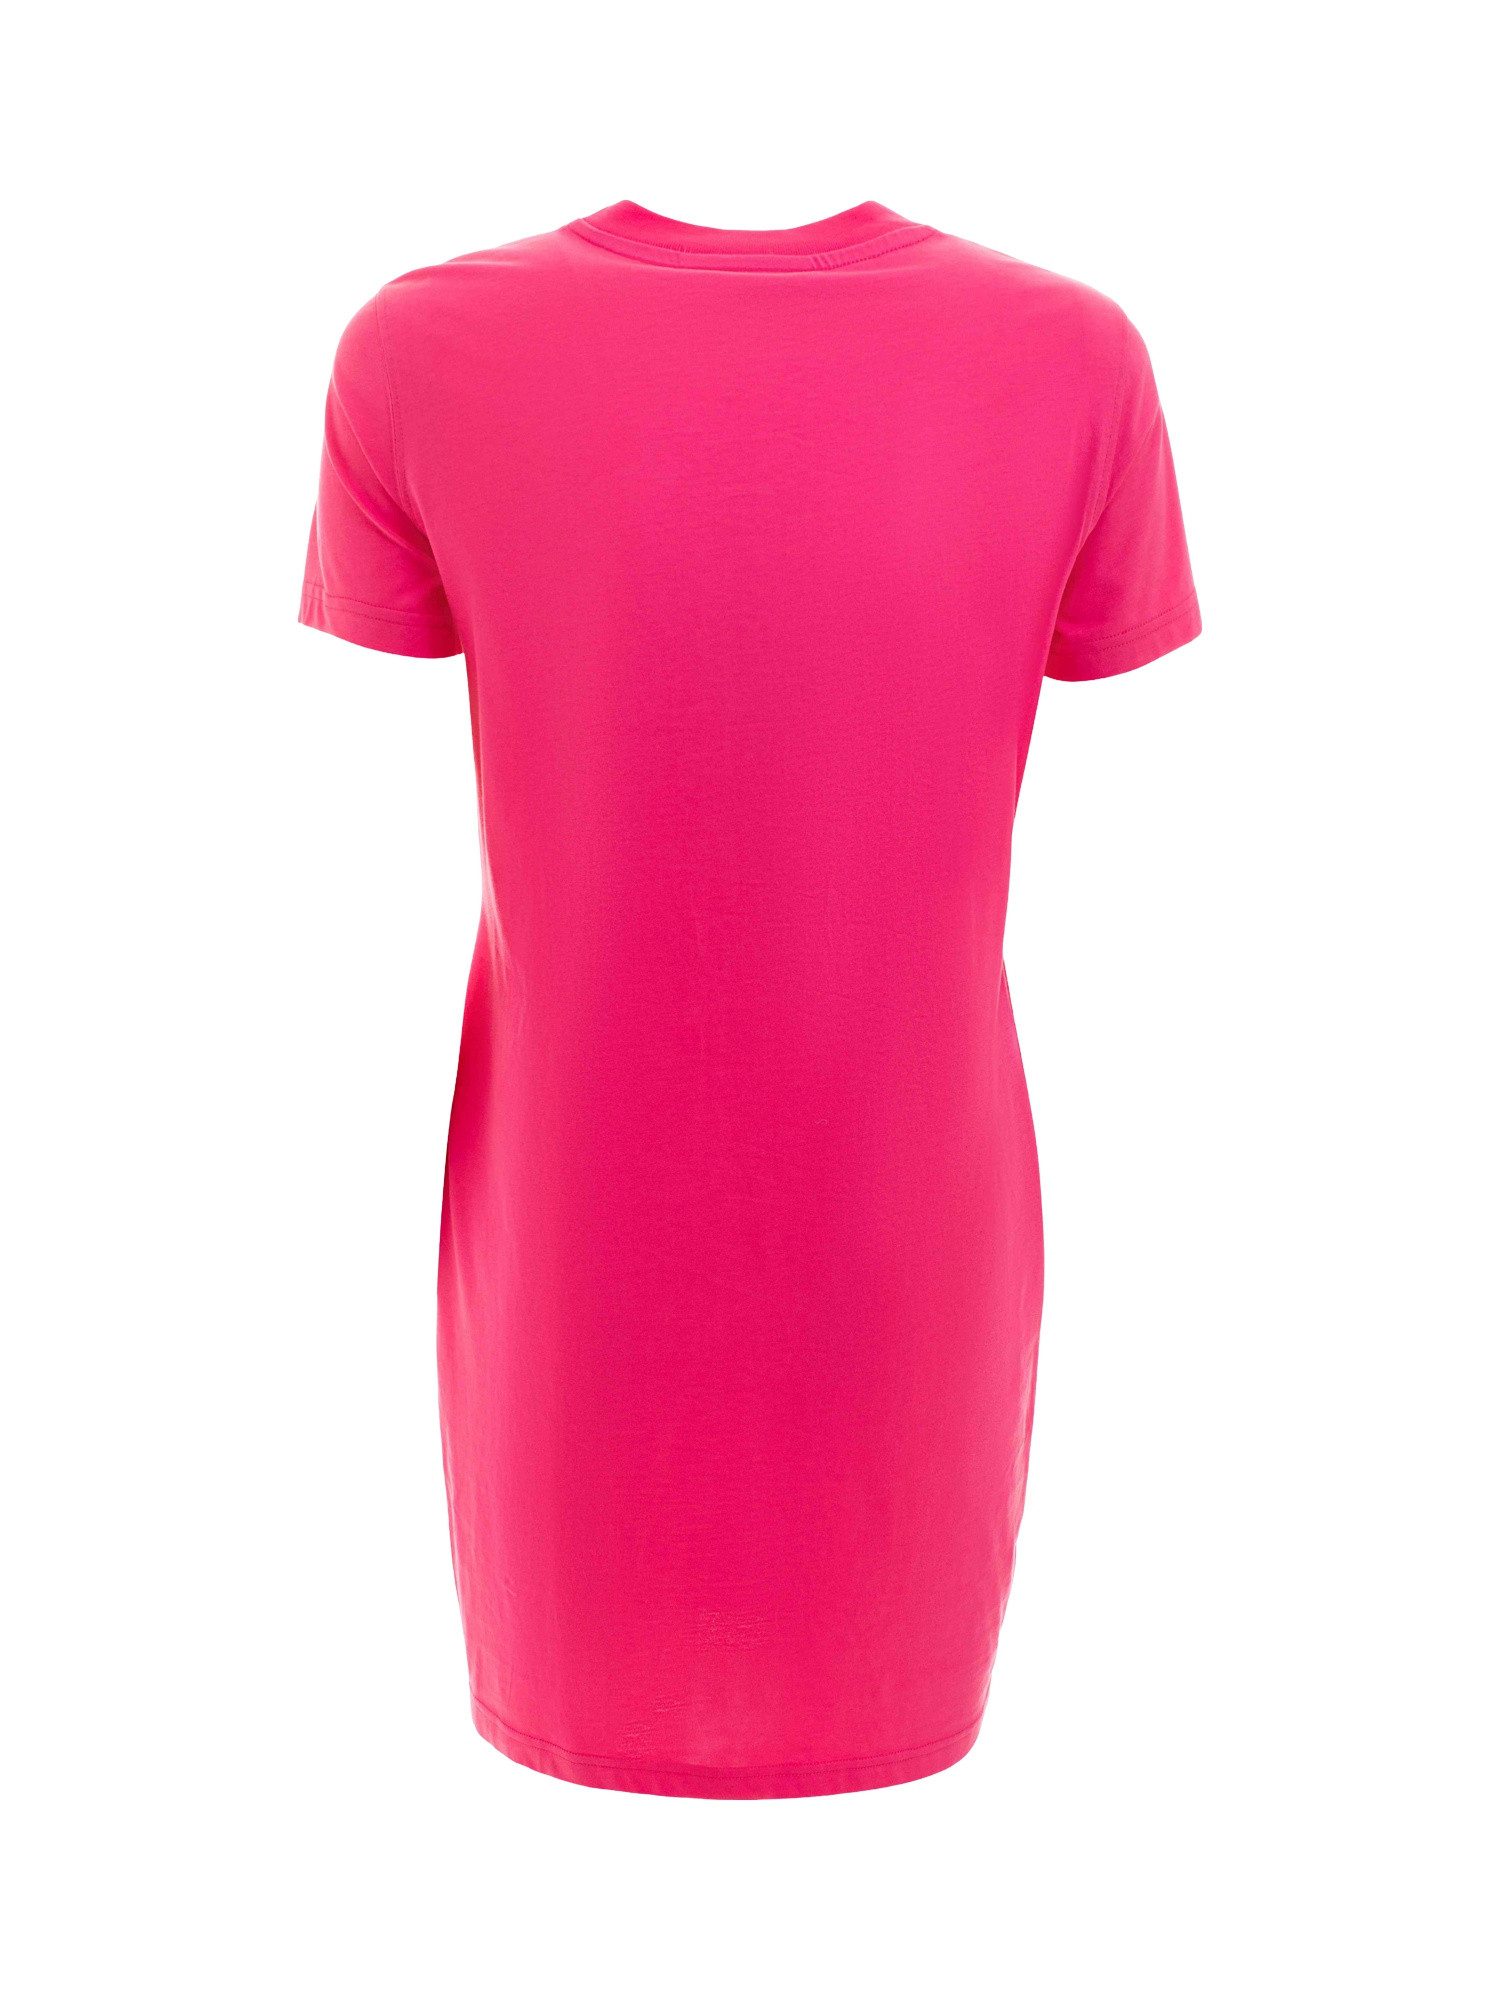 Chiara Ferragni - Short sleeve dress with embroidered logo, Pink Fuchsia, large image number 1